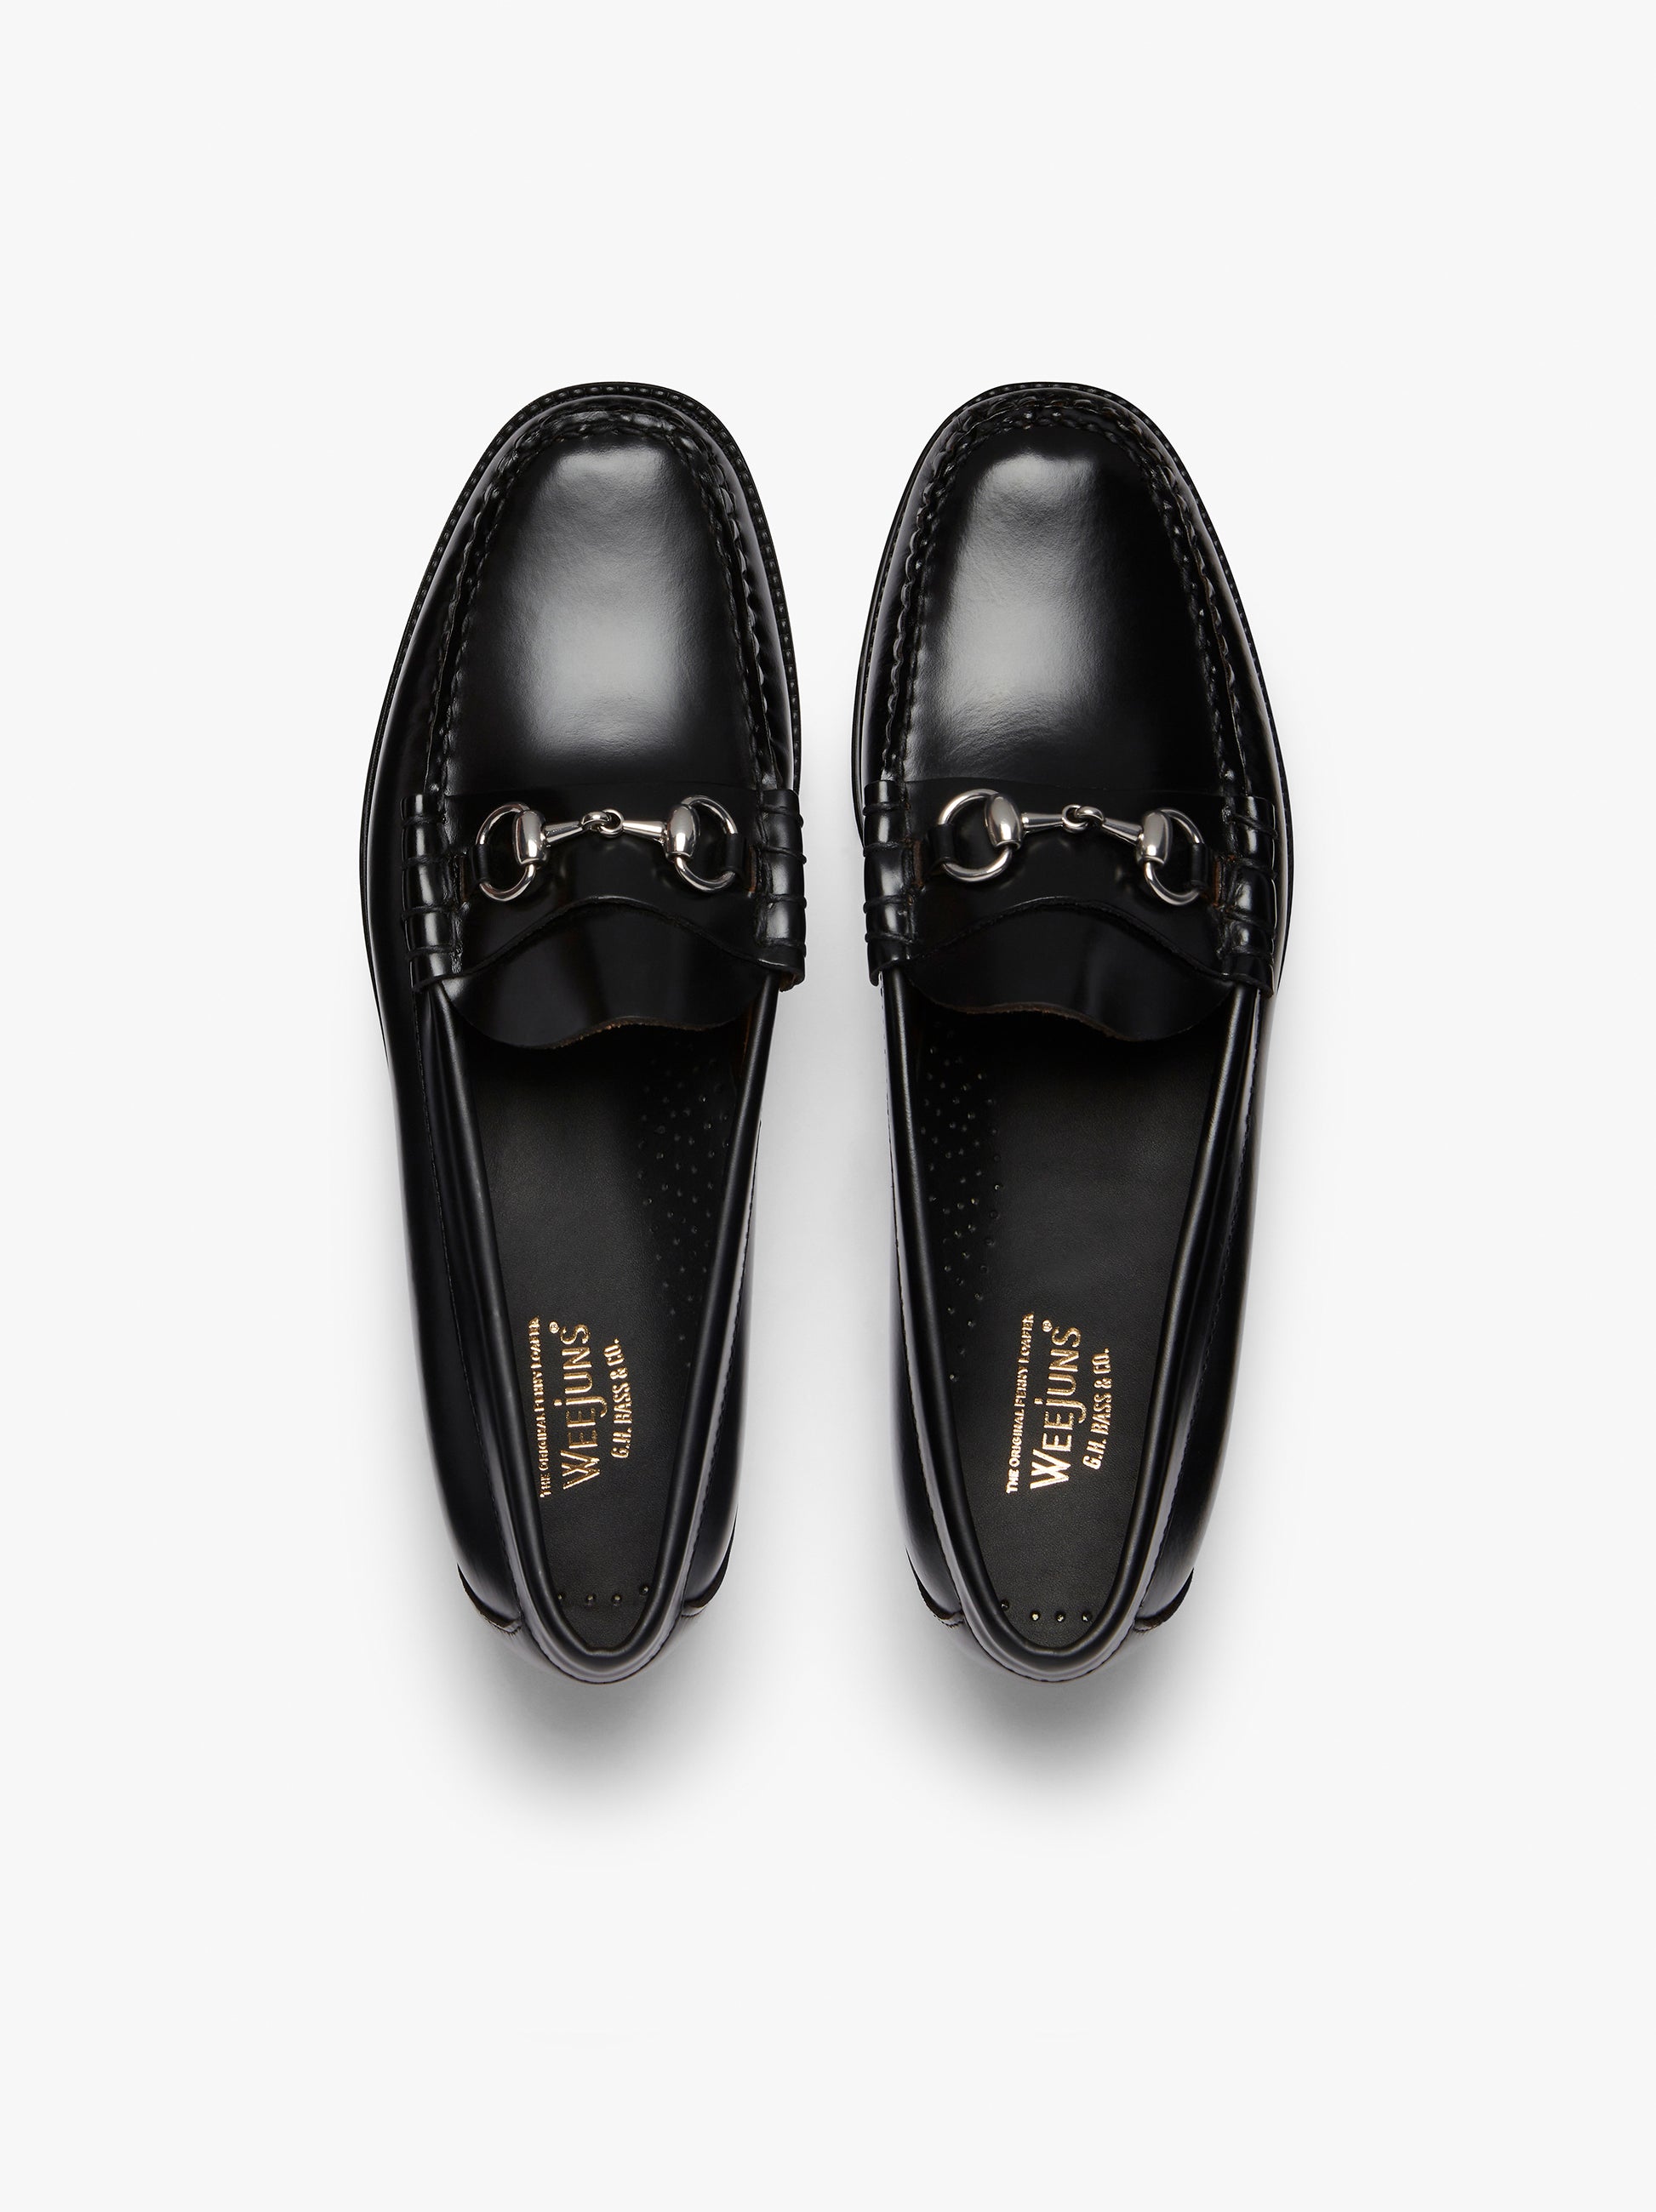 Mens Black Leather Loafers | Chain Loafers Mens – G.H.BASS – G.H.